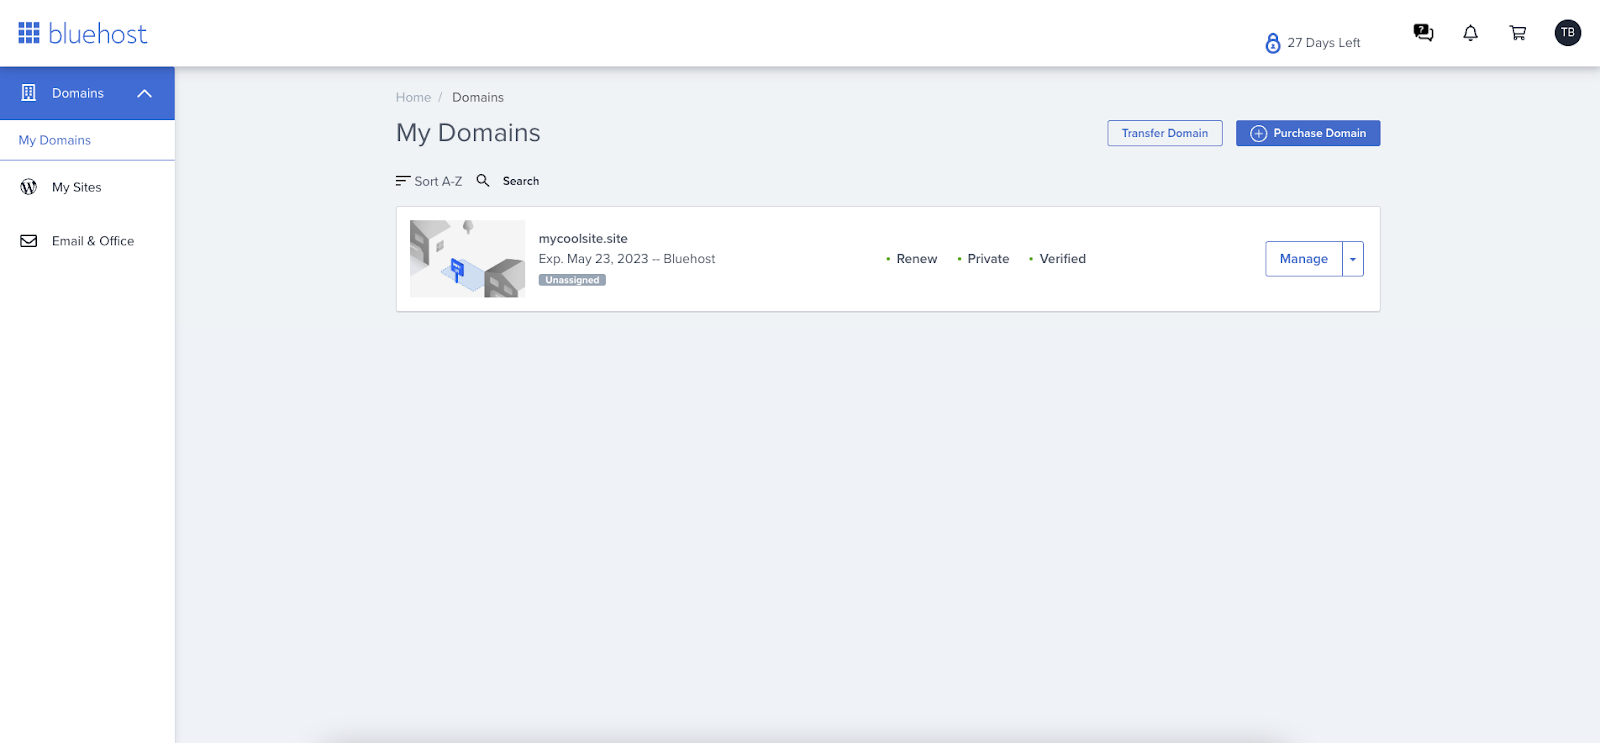 Screenshot of your domains in Bluehost.